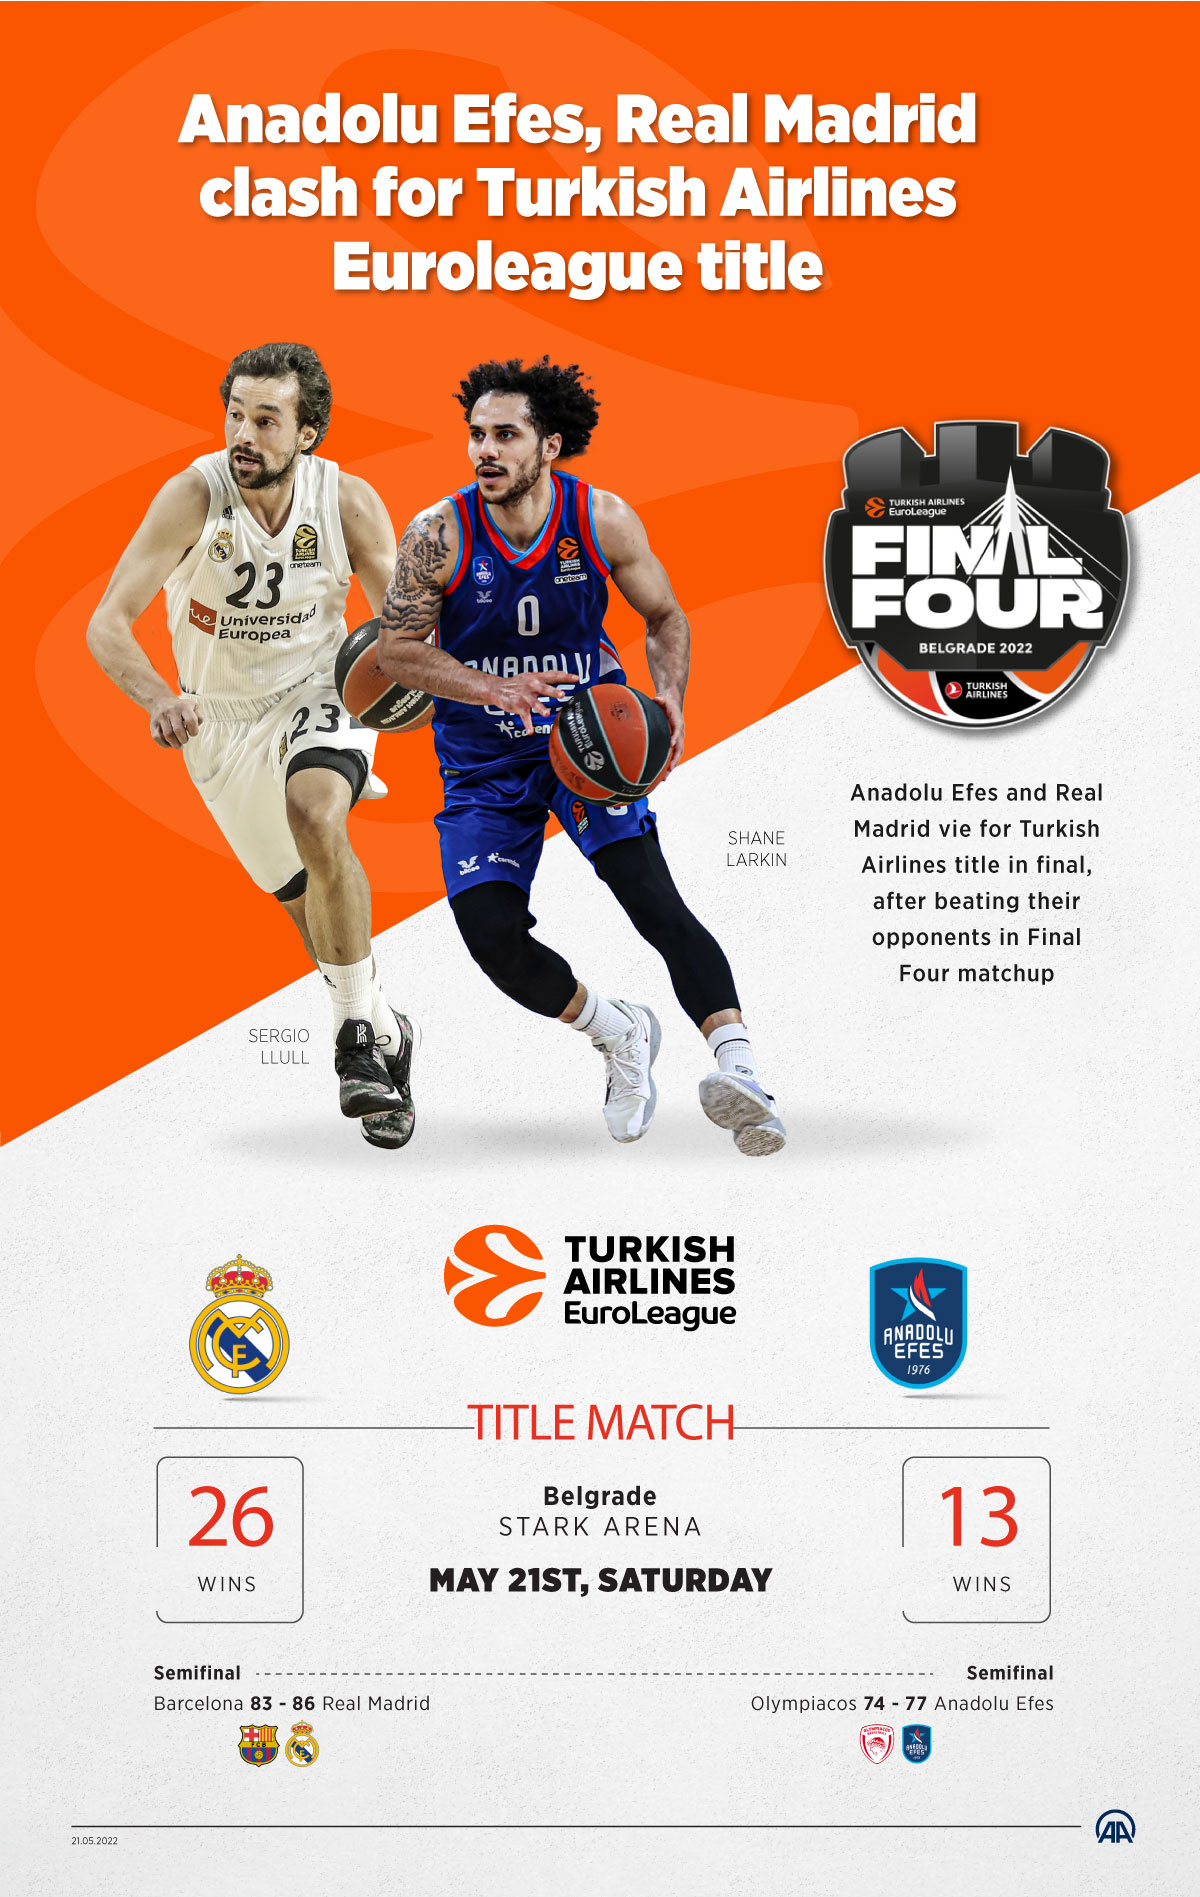 Real Madrid to face Anadolu Efes in 2022 Turkish Airlines EuroLeague final